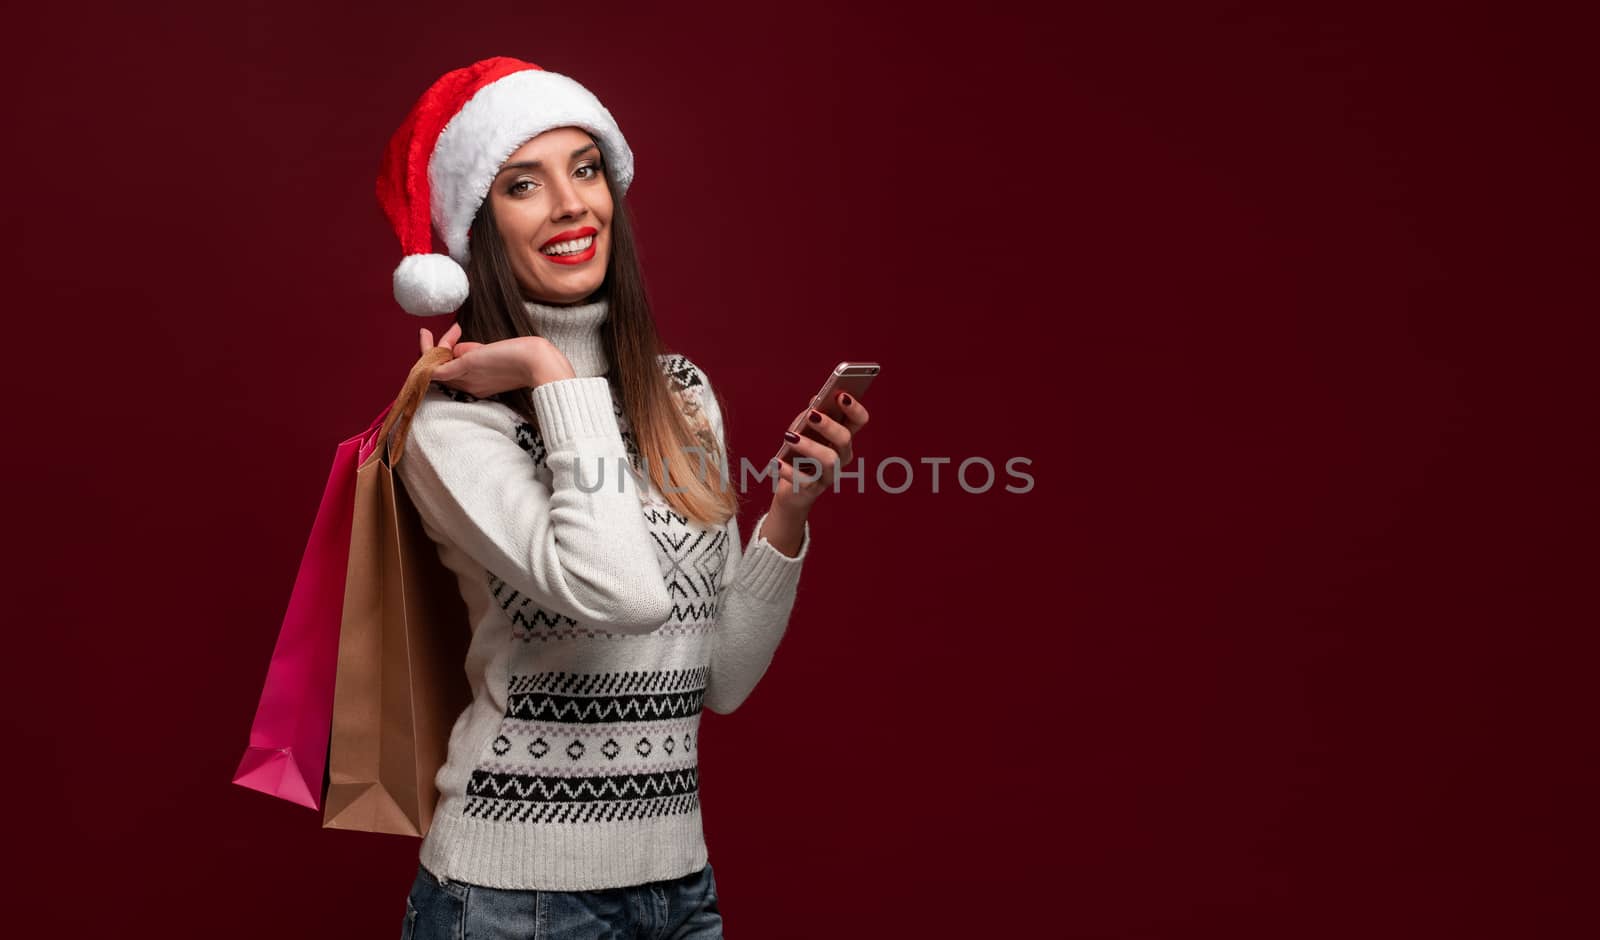 Portrait beautifiul caucasian woman Santa hat on red studio background. Christmas New Year holiday concept. Cute girl teeth smiling positive emotions with shopping bag and smartphone Online shopping